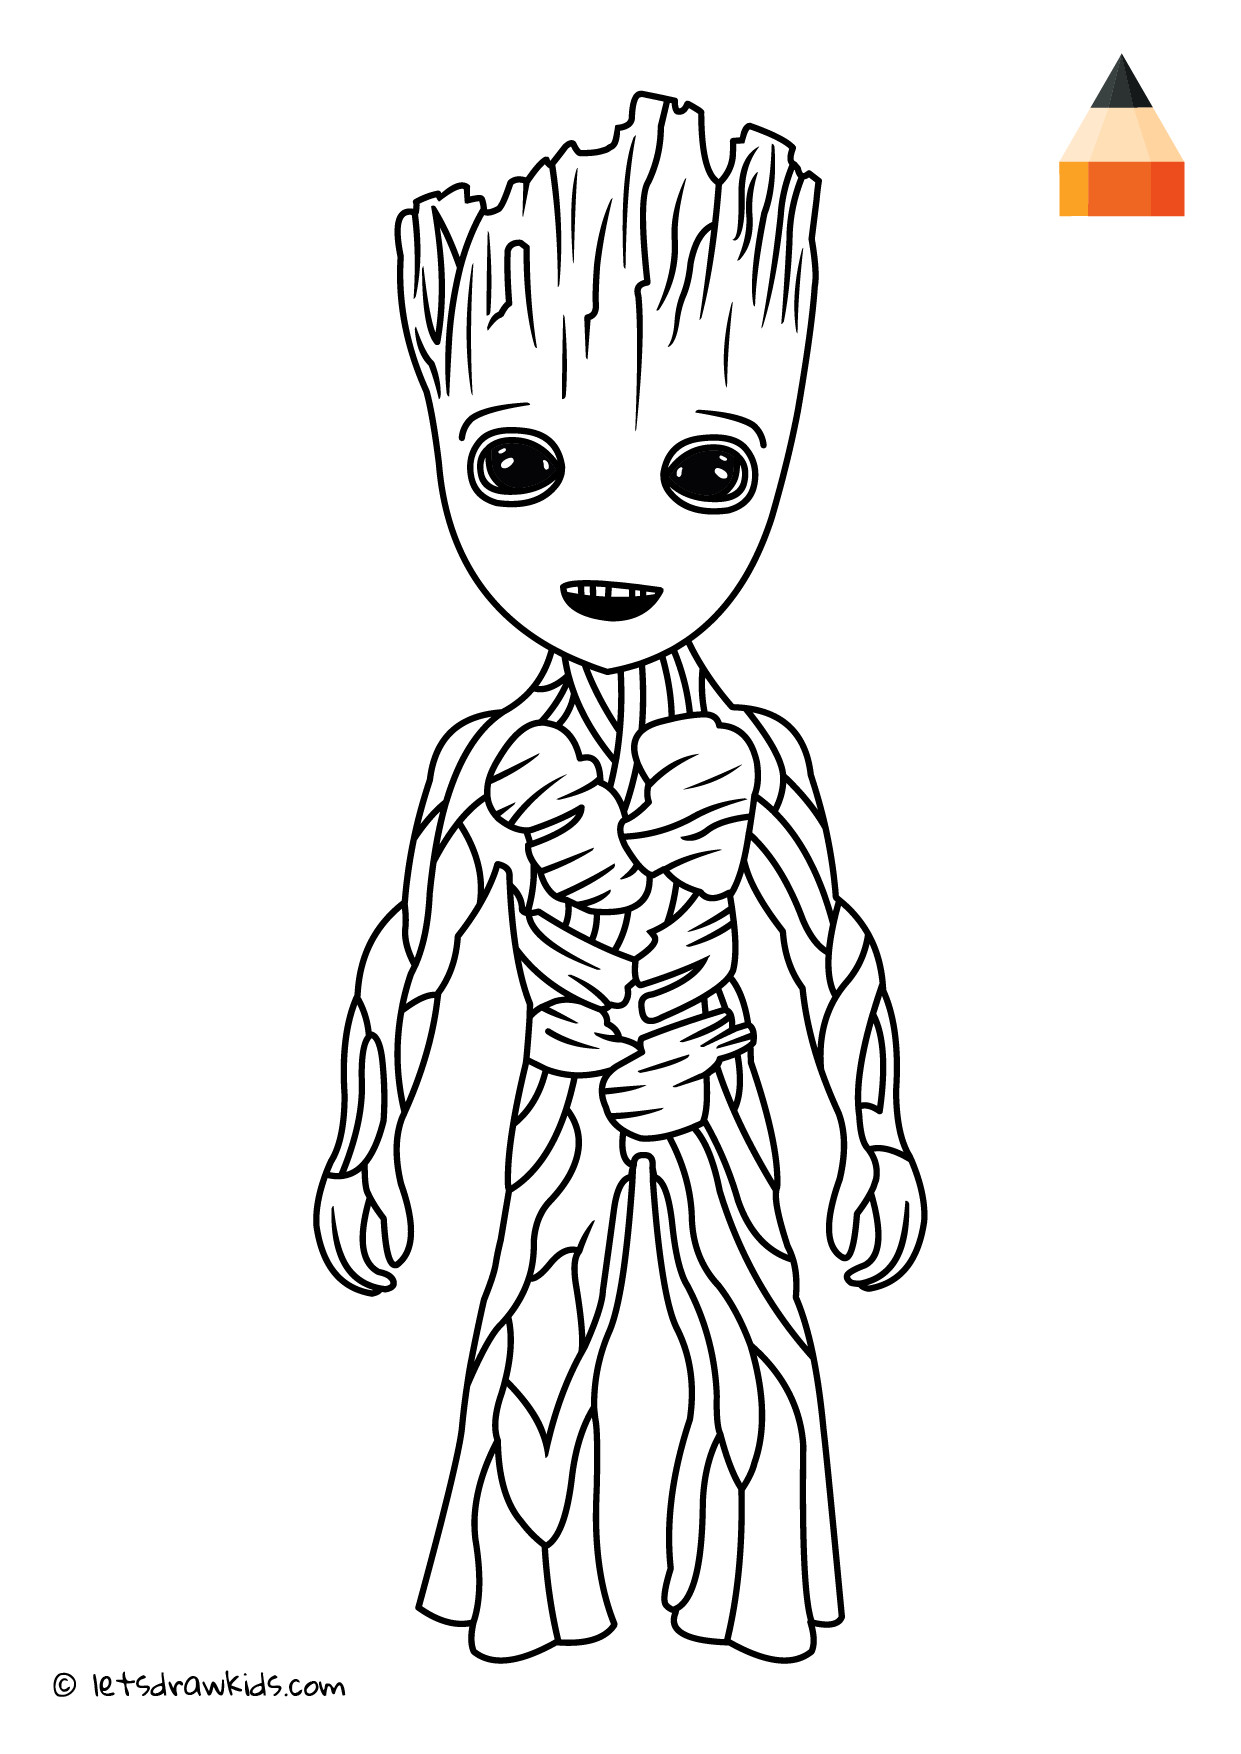 Baby Groot Coloring Pages
 Coloring Page Teenager Groot